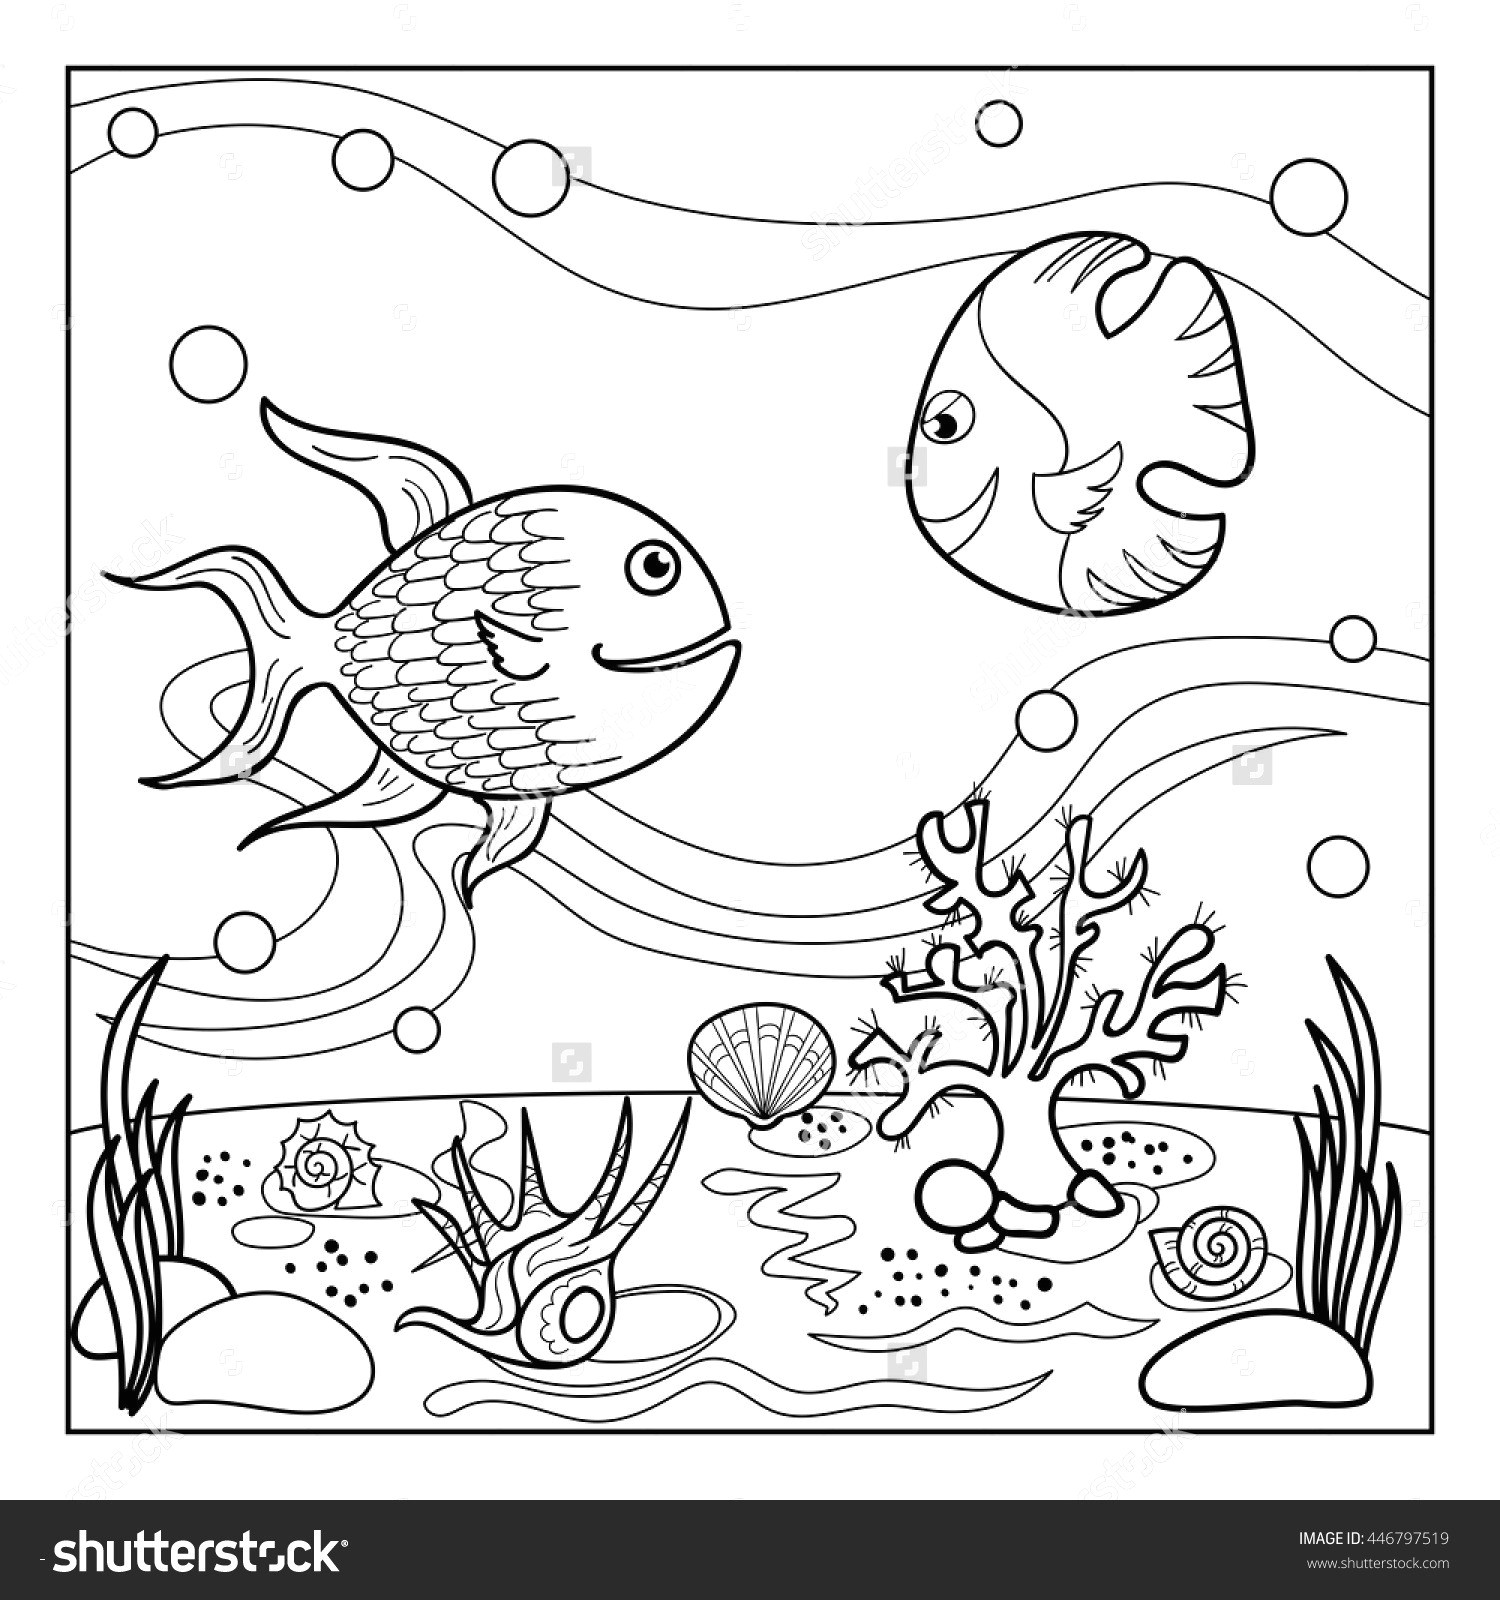 Easy Drawings Hands Easy to Draw Feather Feather Coloring Page Fresh Home Coloring Pages